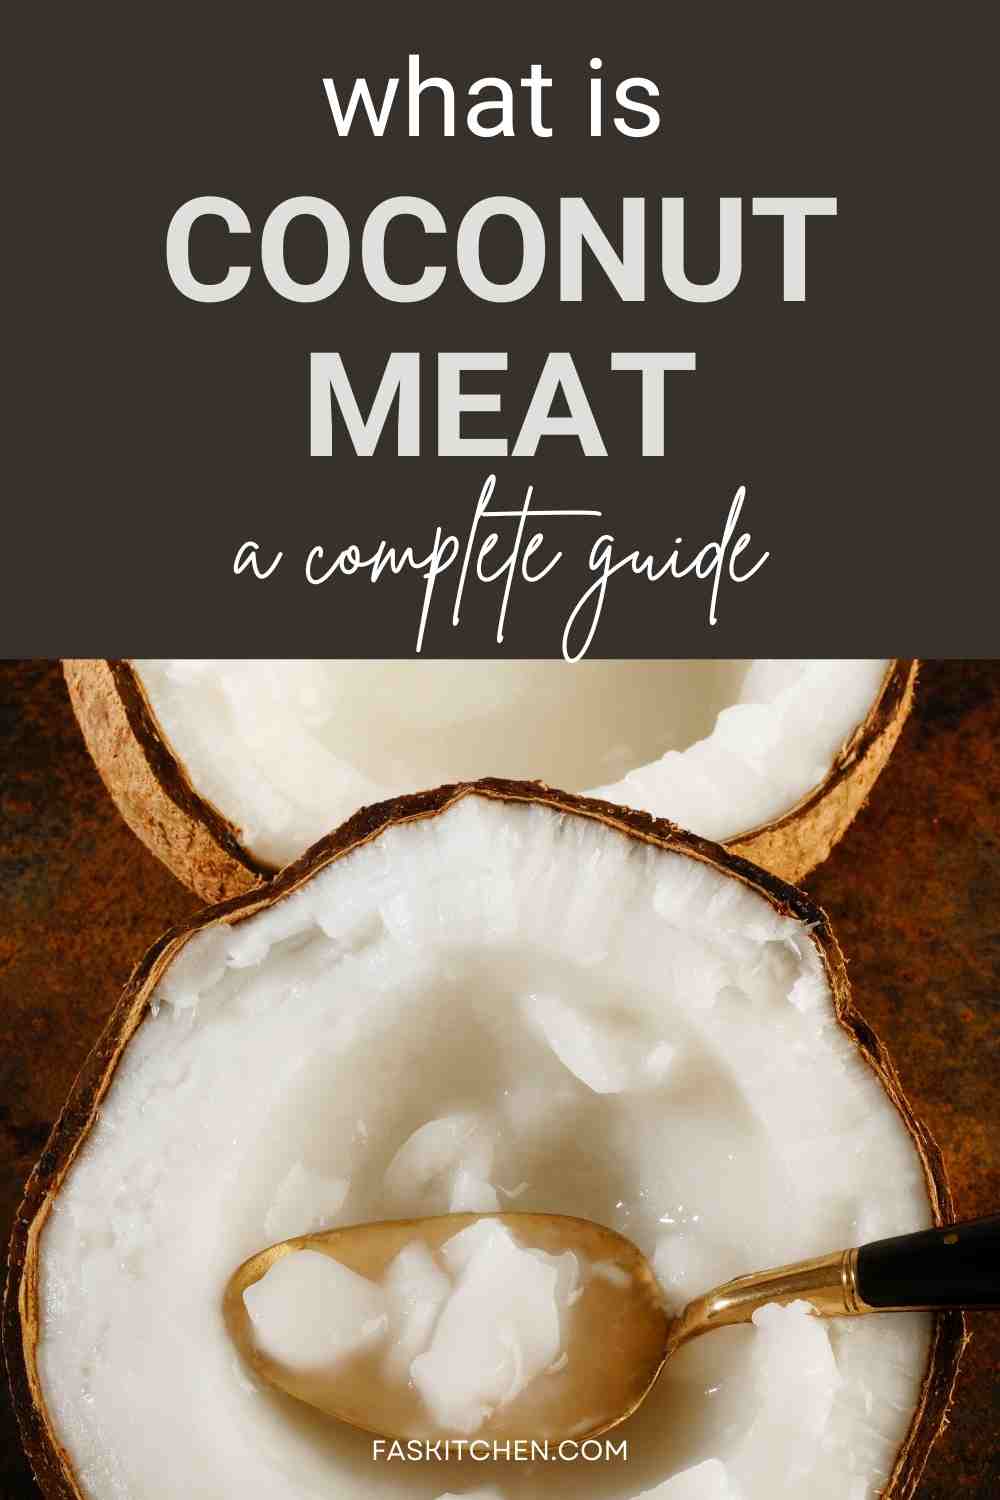 Coconut Meat 101 Nutrition Benefits